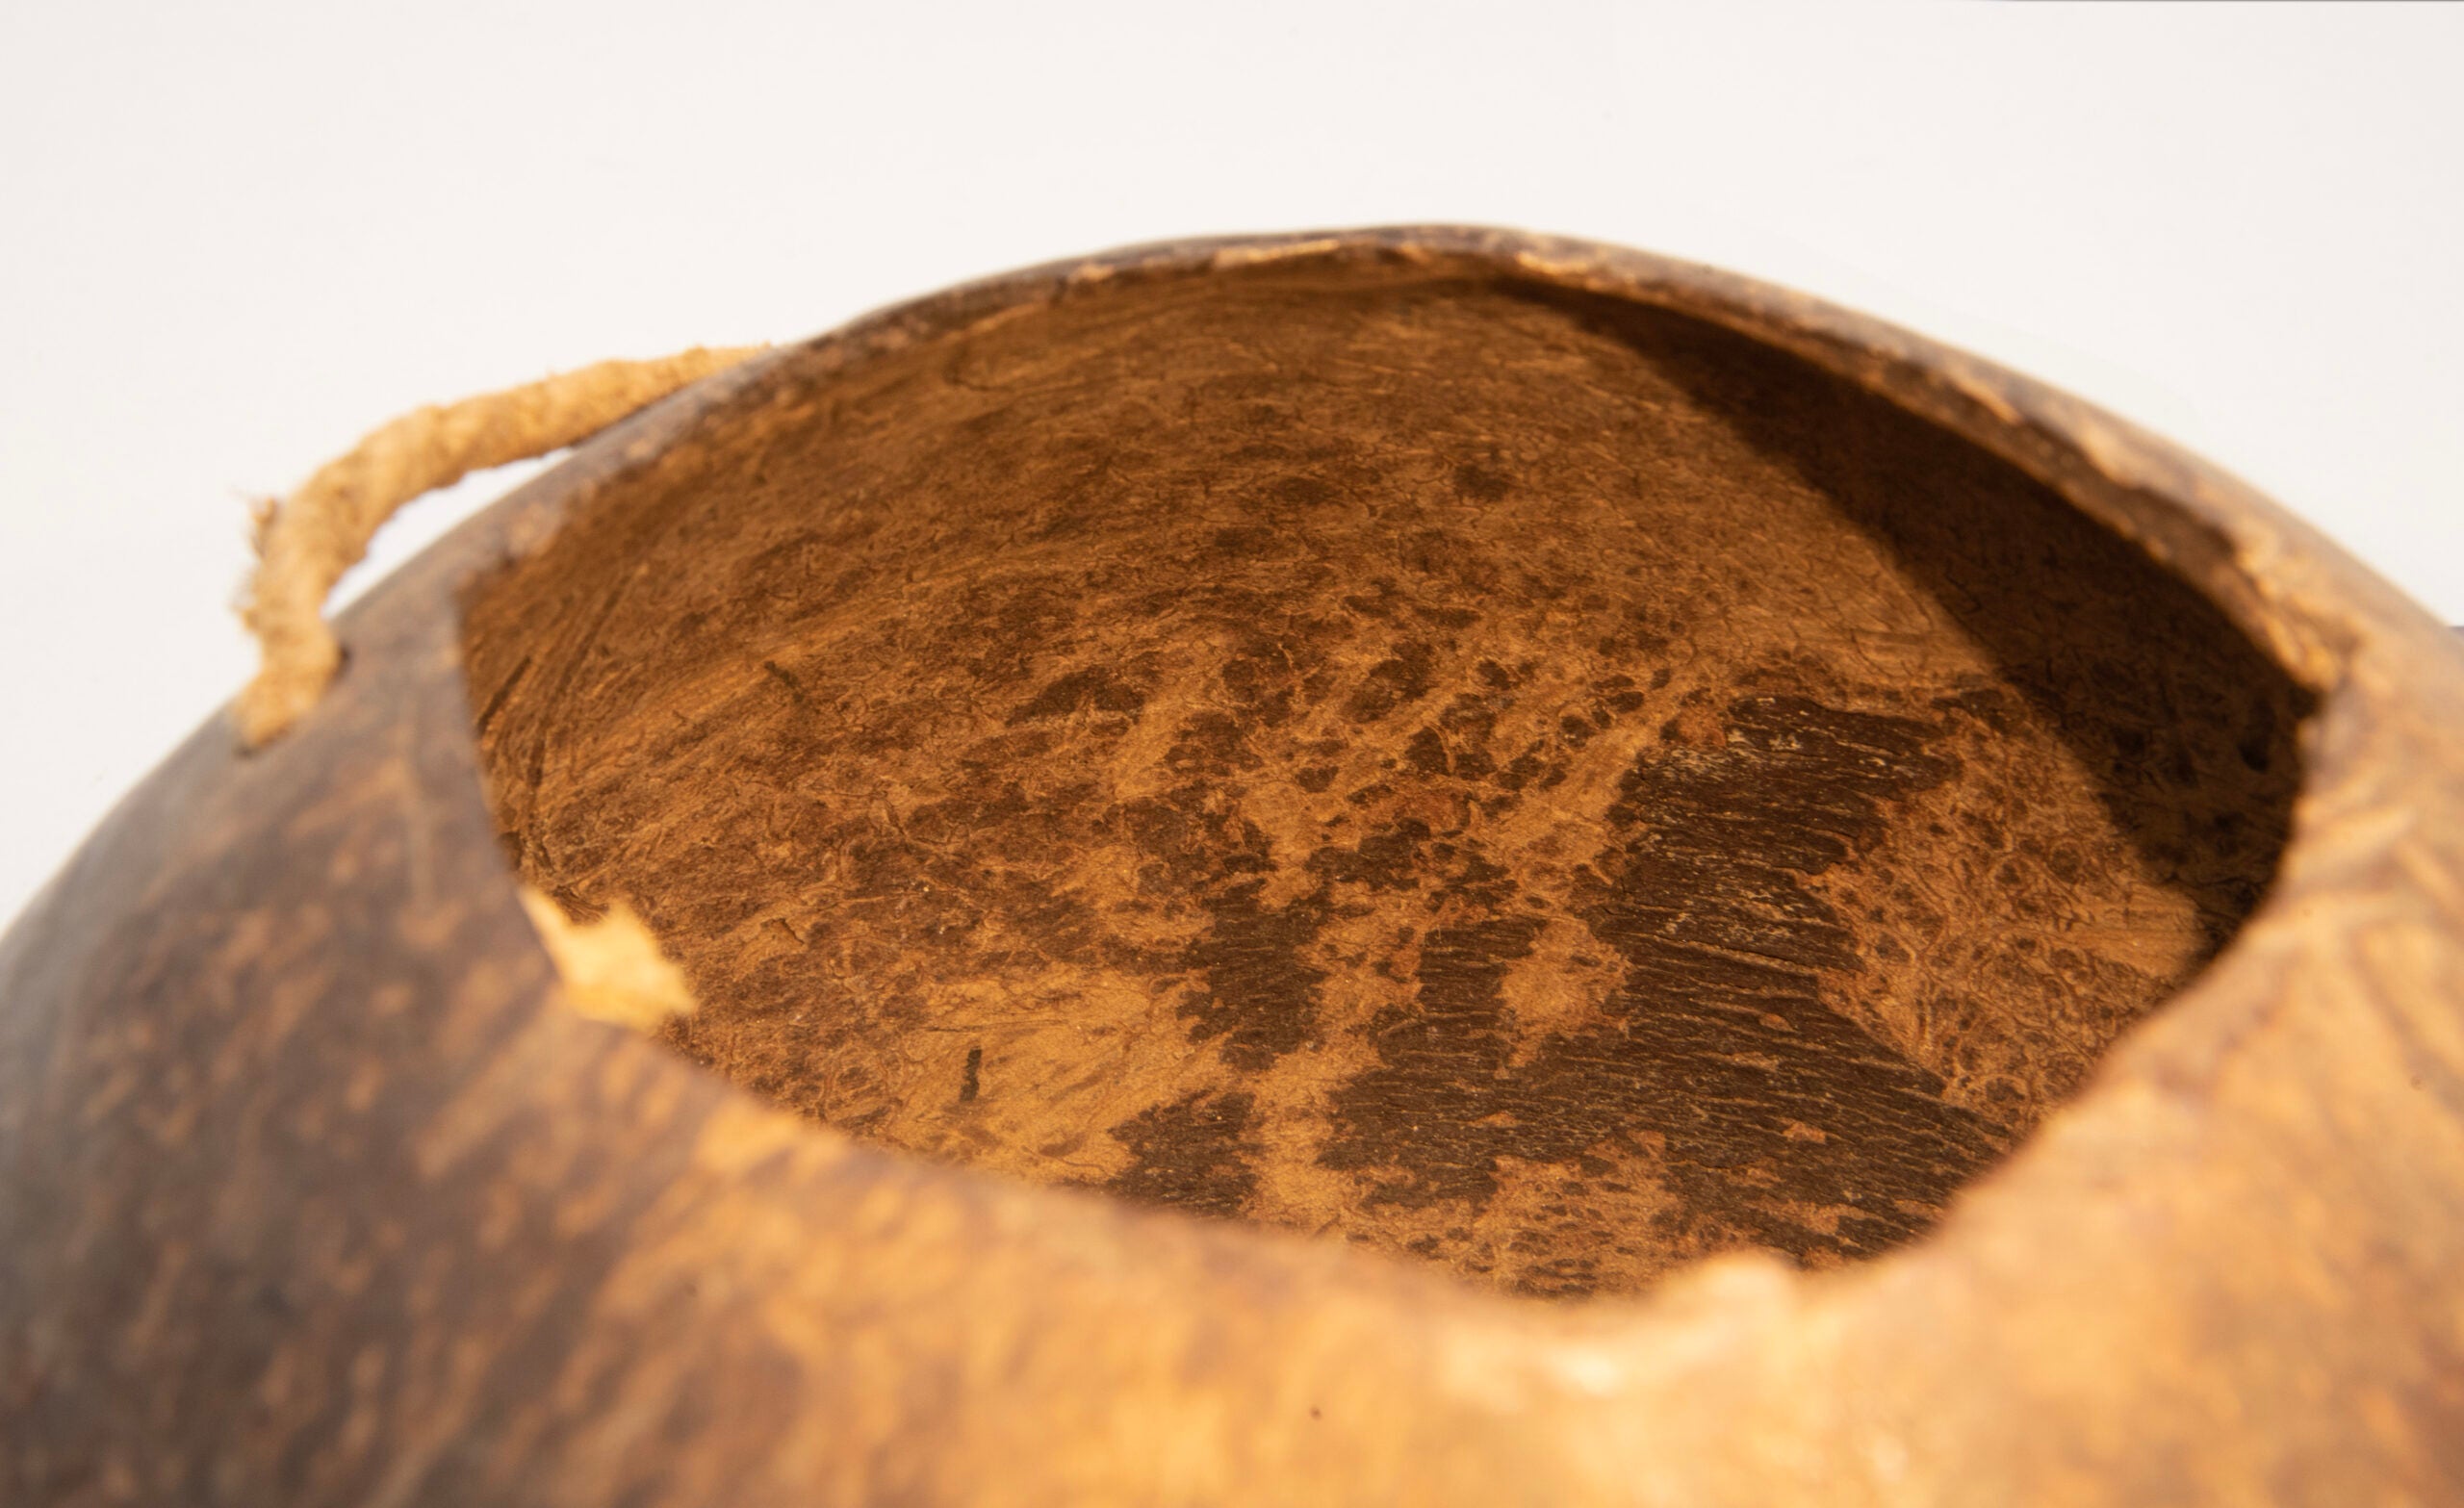 The interior of a coconut shell container. The interior is scraped, and cracks in the coconut are visible.